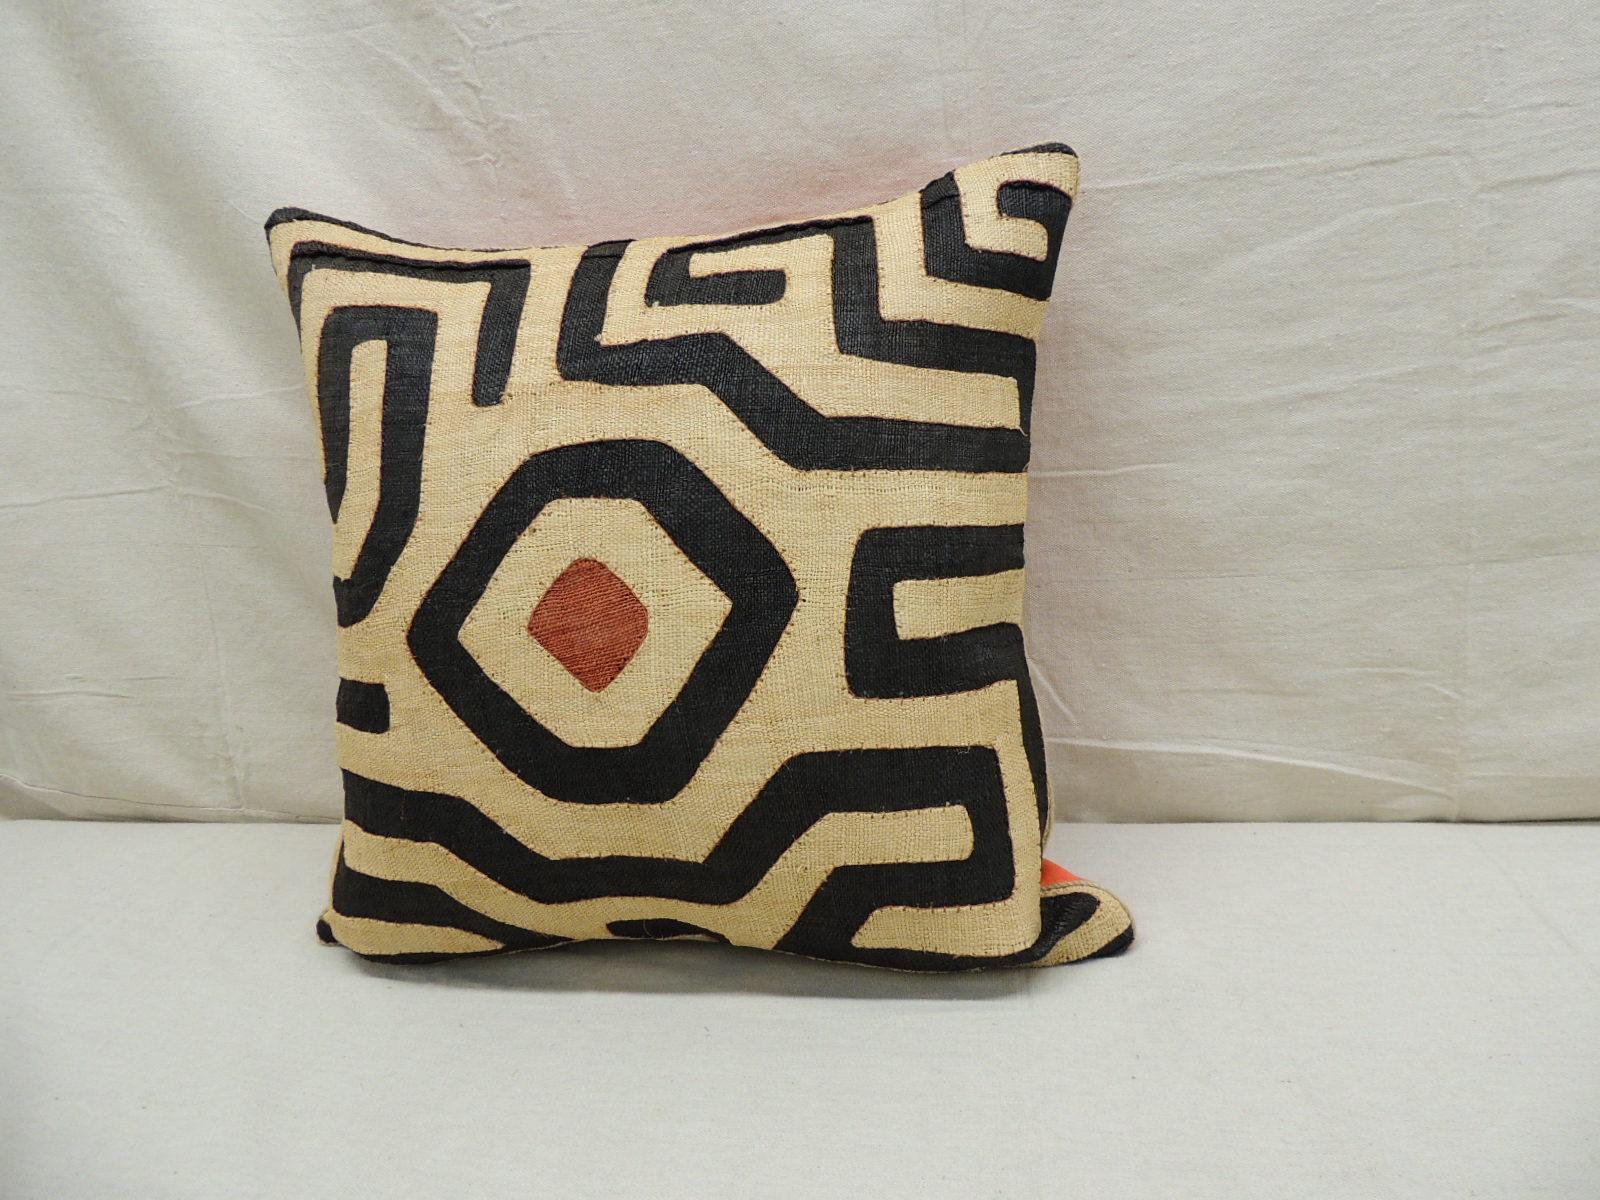 Hand-Crafted Vintage Kuba Tan and Black Handwoven Patchwork Square African Decorative Pillow